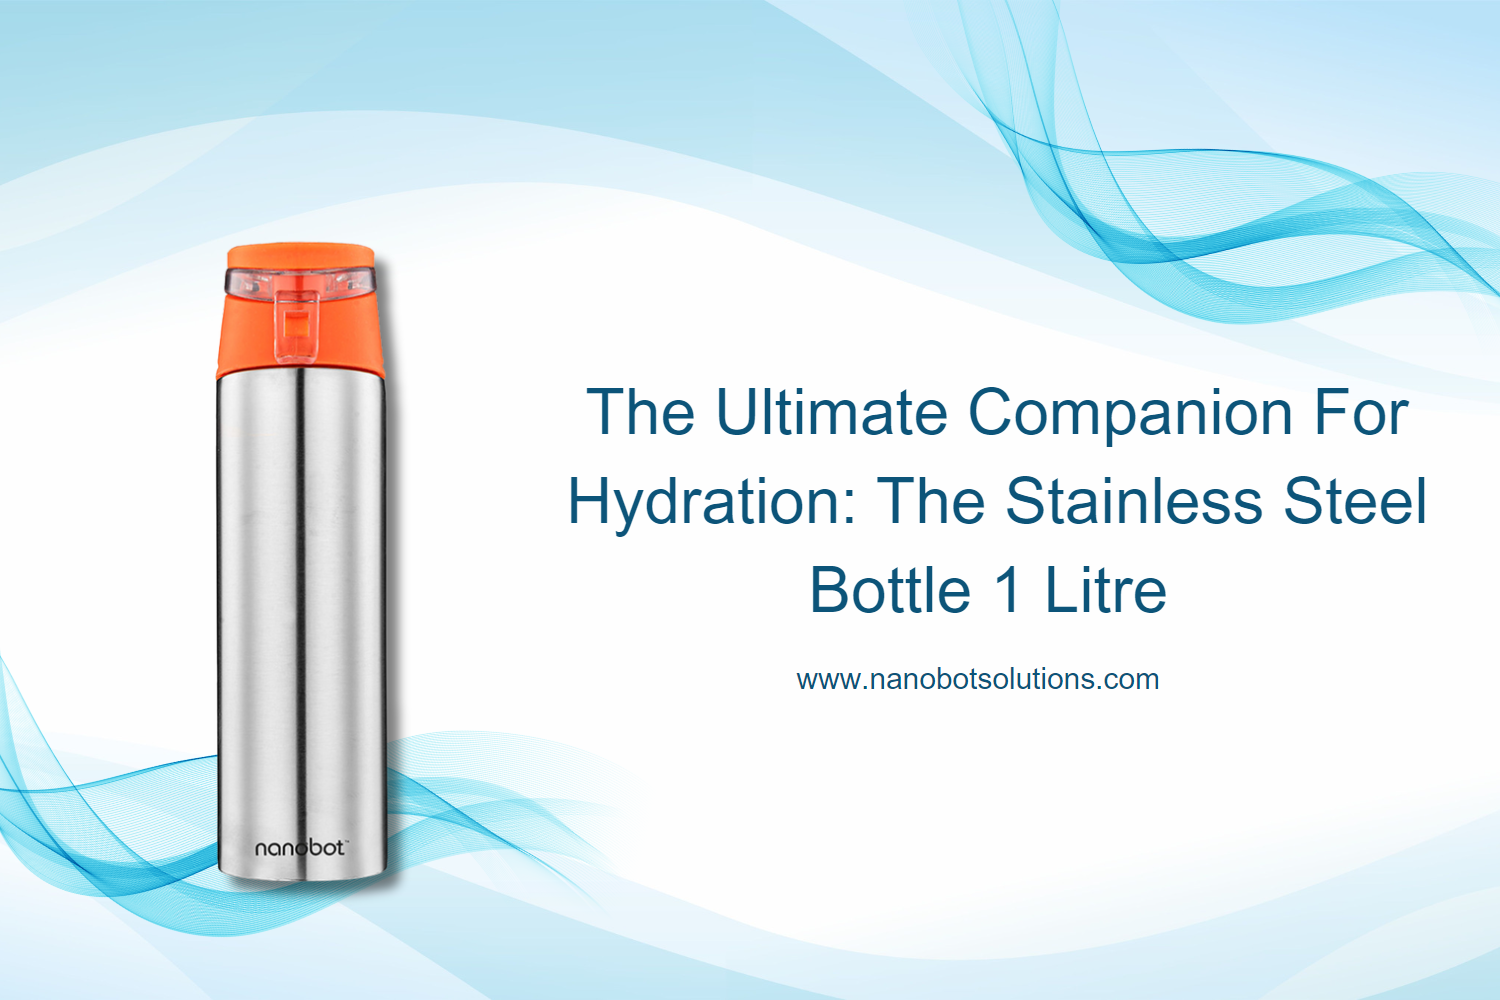 The Ultimate Companion for Hydration: The Stainless Steel Bottle 1 Litre -Nanobot